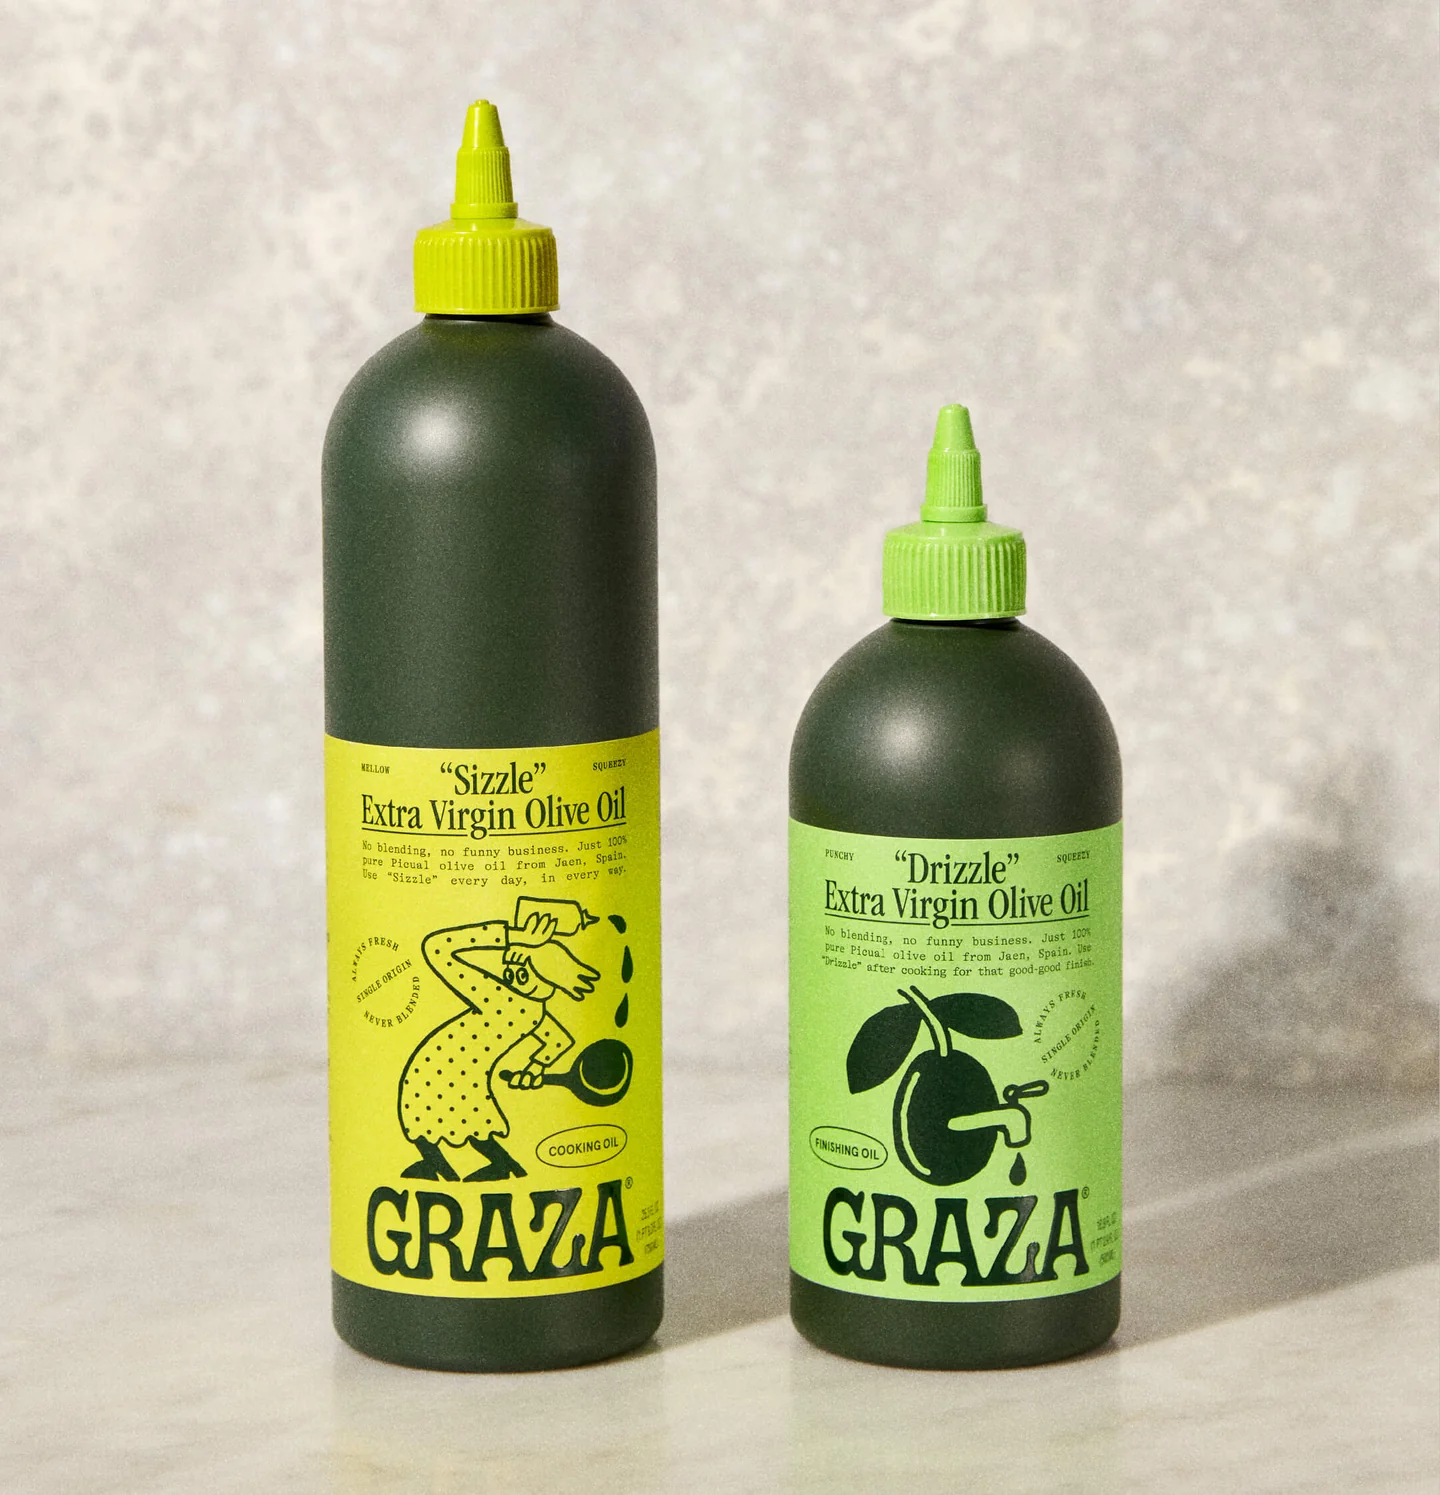 Graza olive oil bottles in dark green with squeeze nozzle